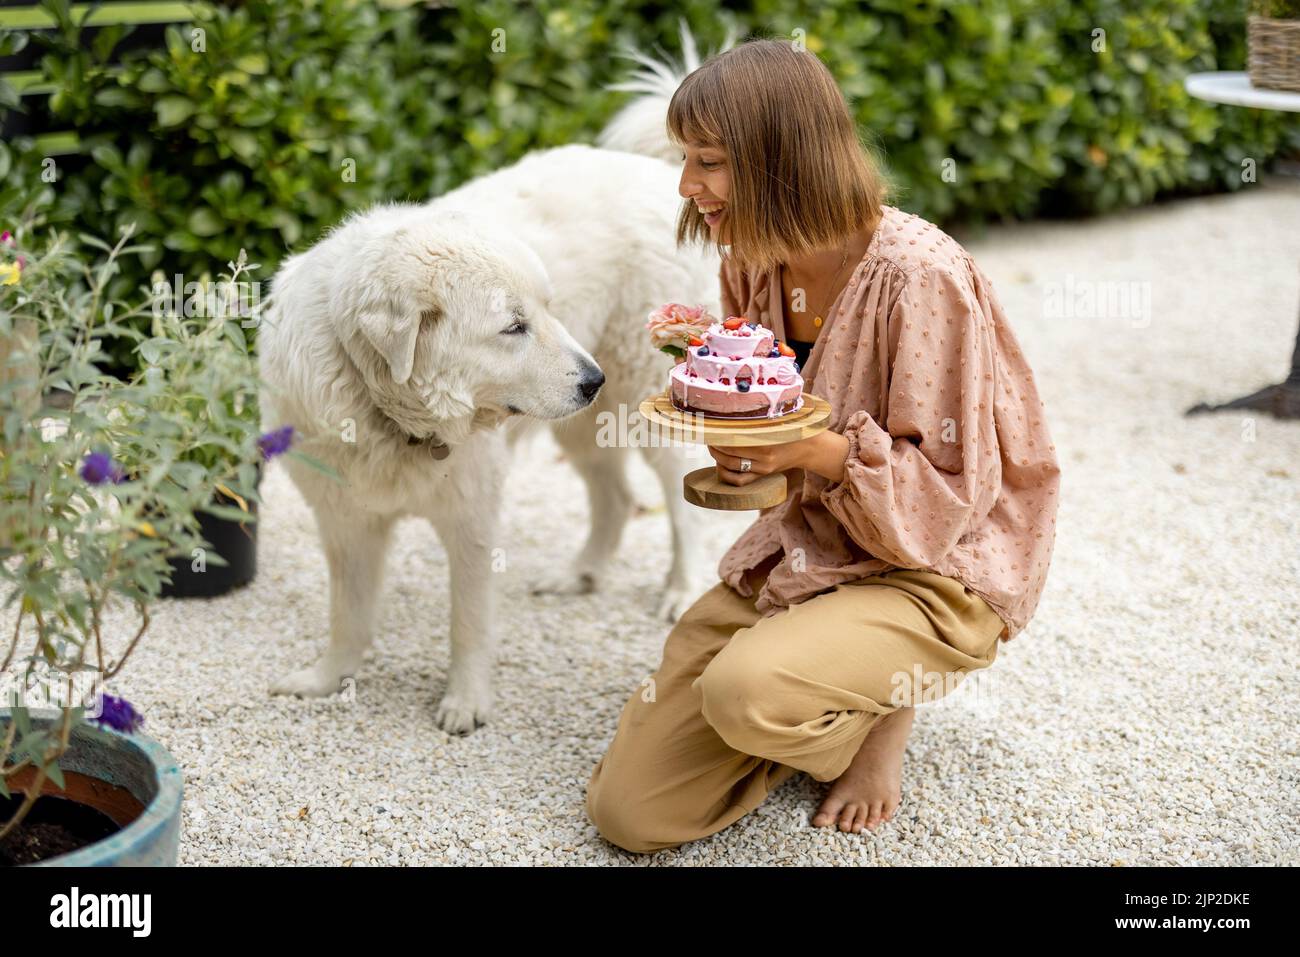 Cheerful woman playing with her adorable white dog, while sitting with festive cake in garden. Holiday celebration with pets concept Stock Photo